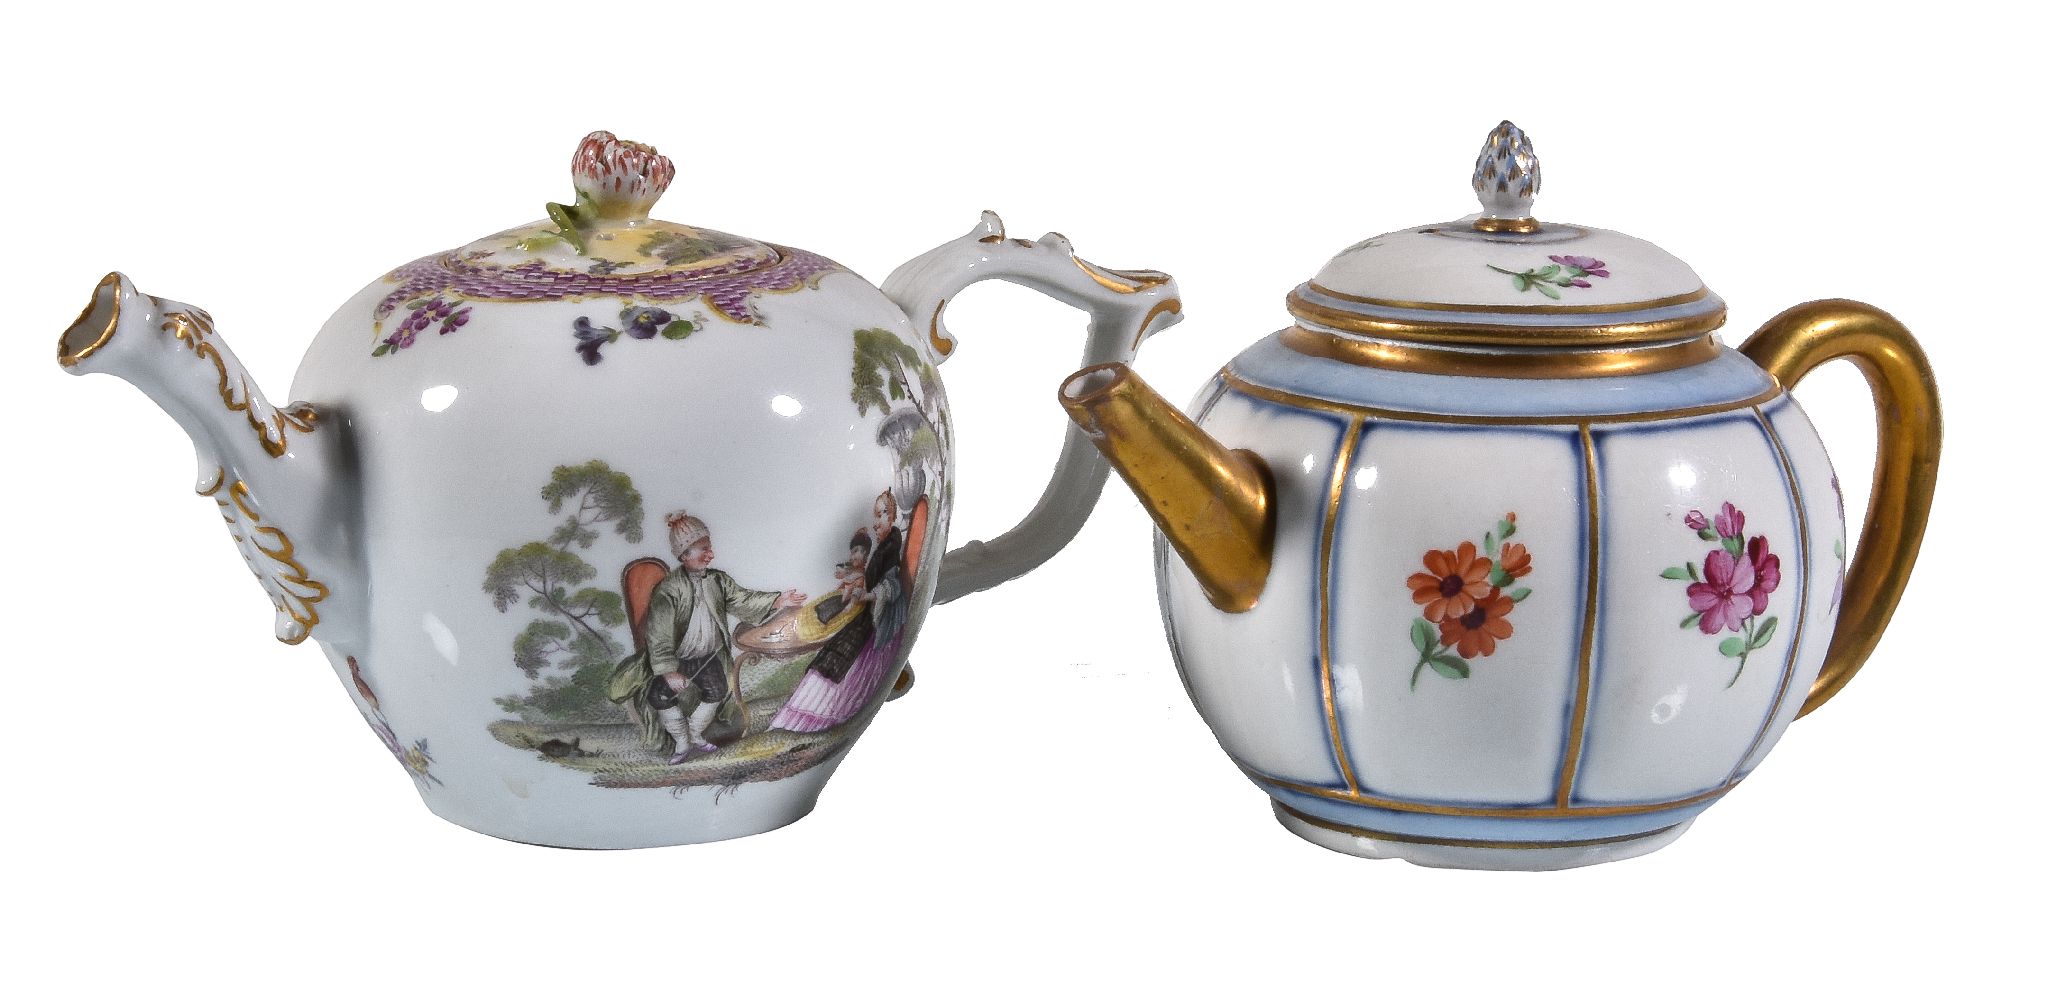 A Meissen porcelain bullet-shaped tea pot and cover, mid-18th century